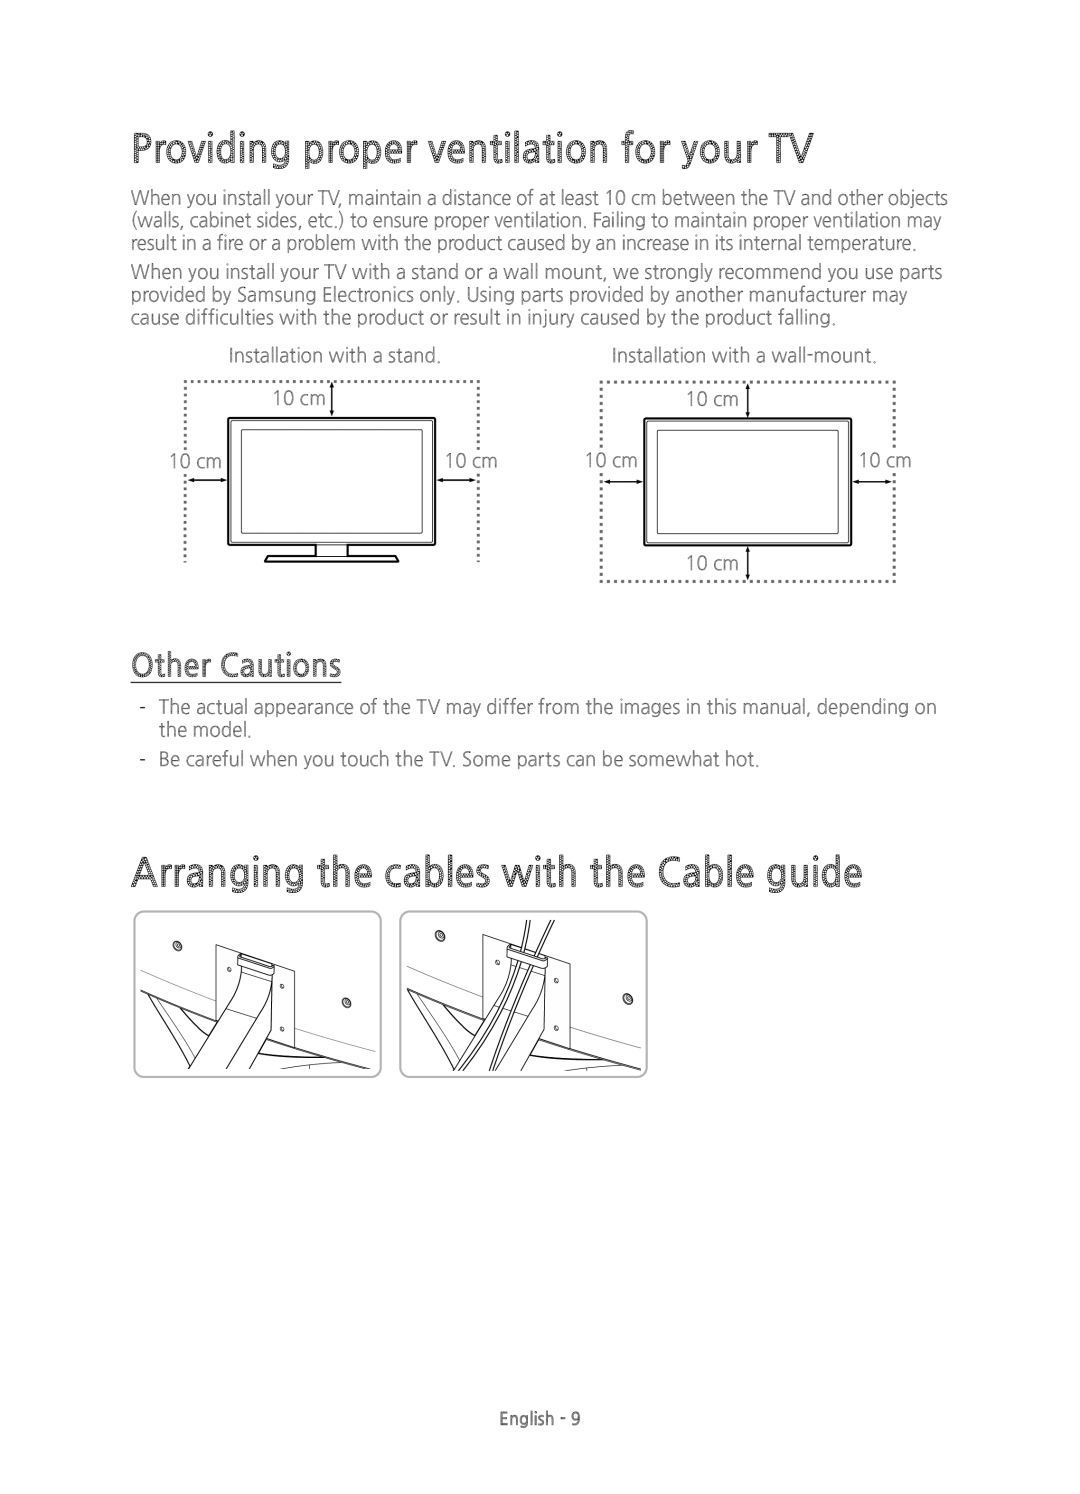 Samsung UE78JS9500TXXU Providing proper ventilation for your TV, Arranging the cables with the Cable guide, Other Cautions 